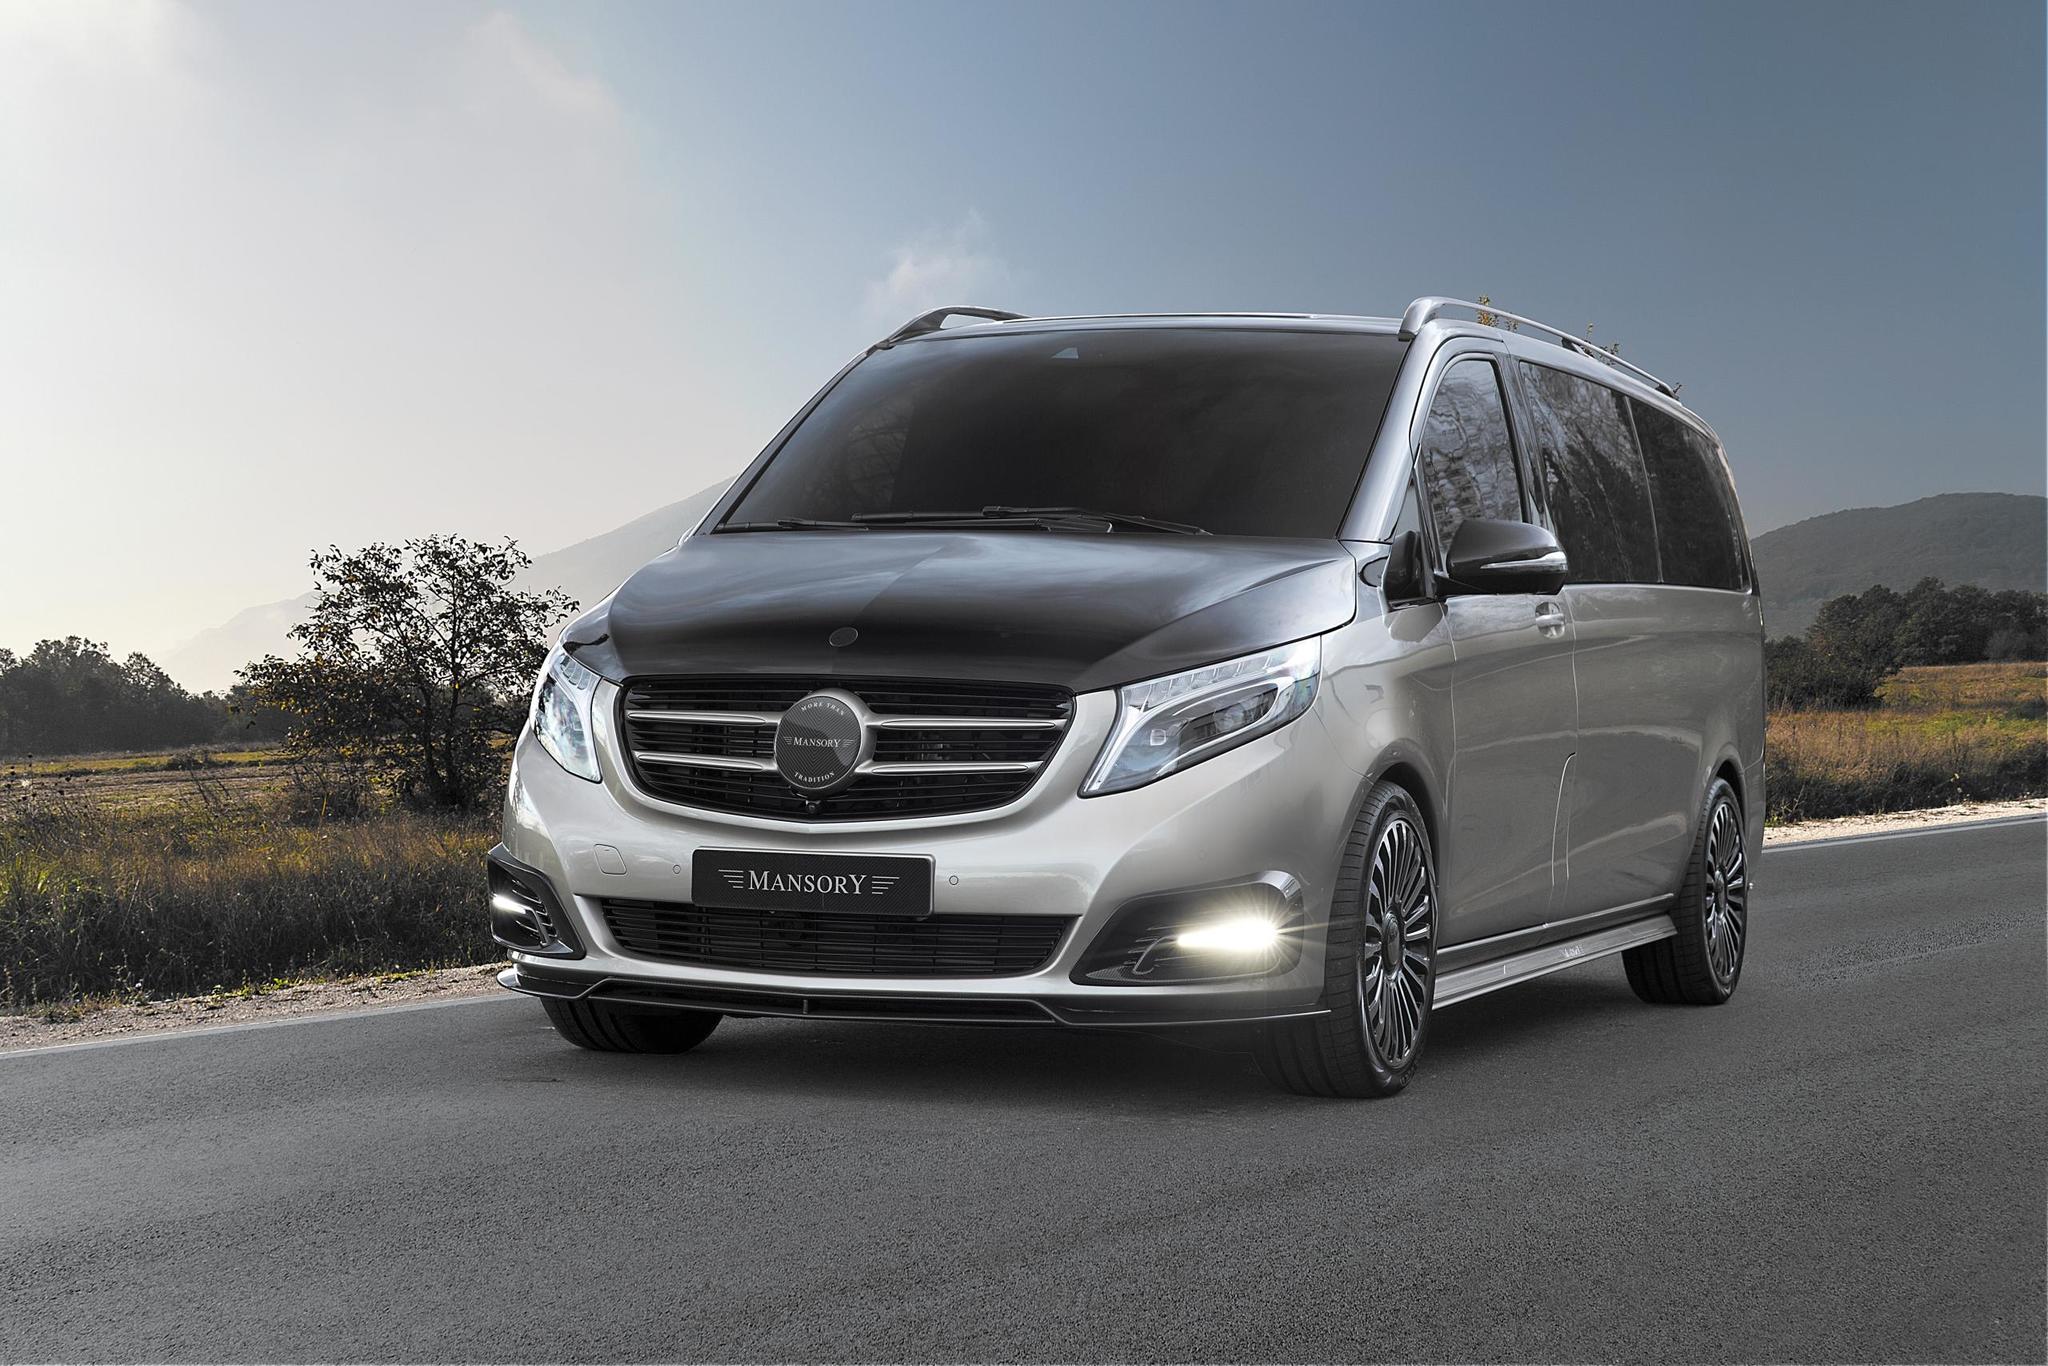 Mansory body kit for Mercedes-Benz V-Class new style